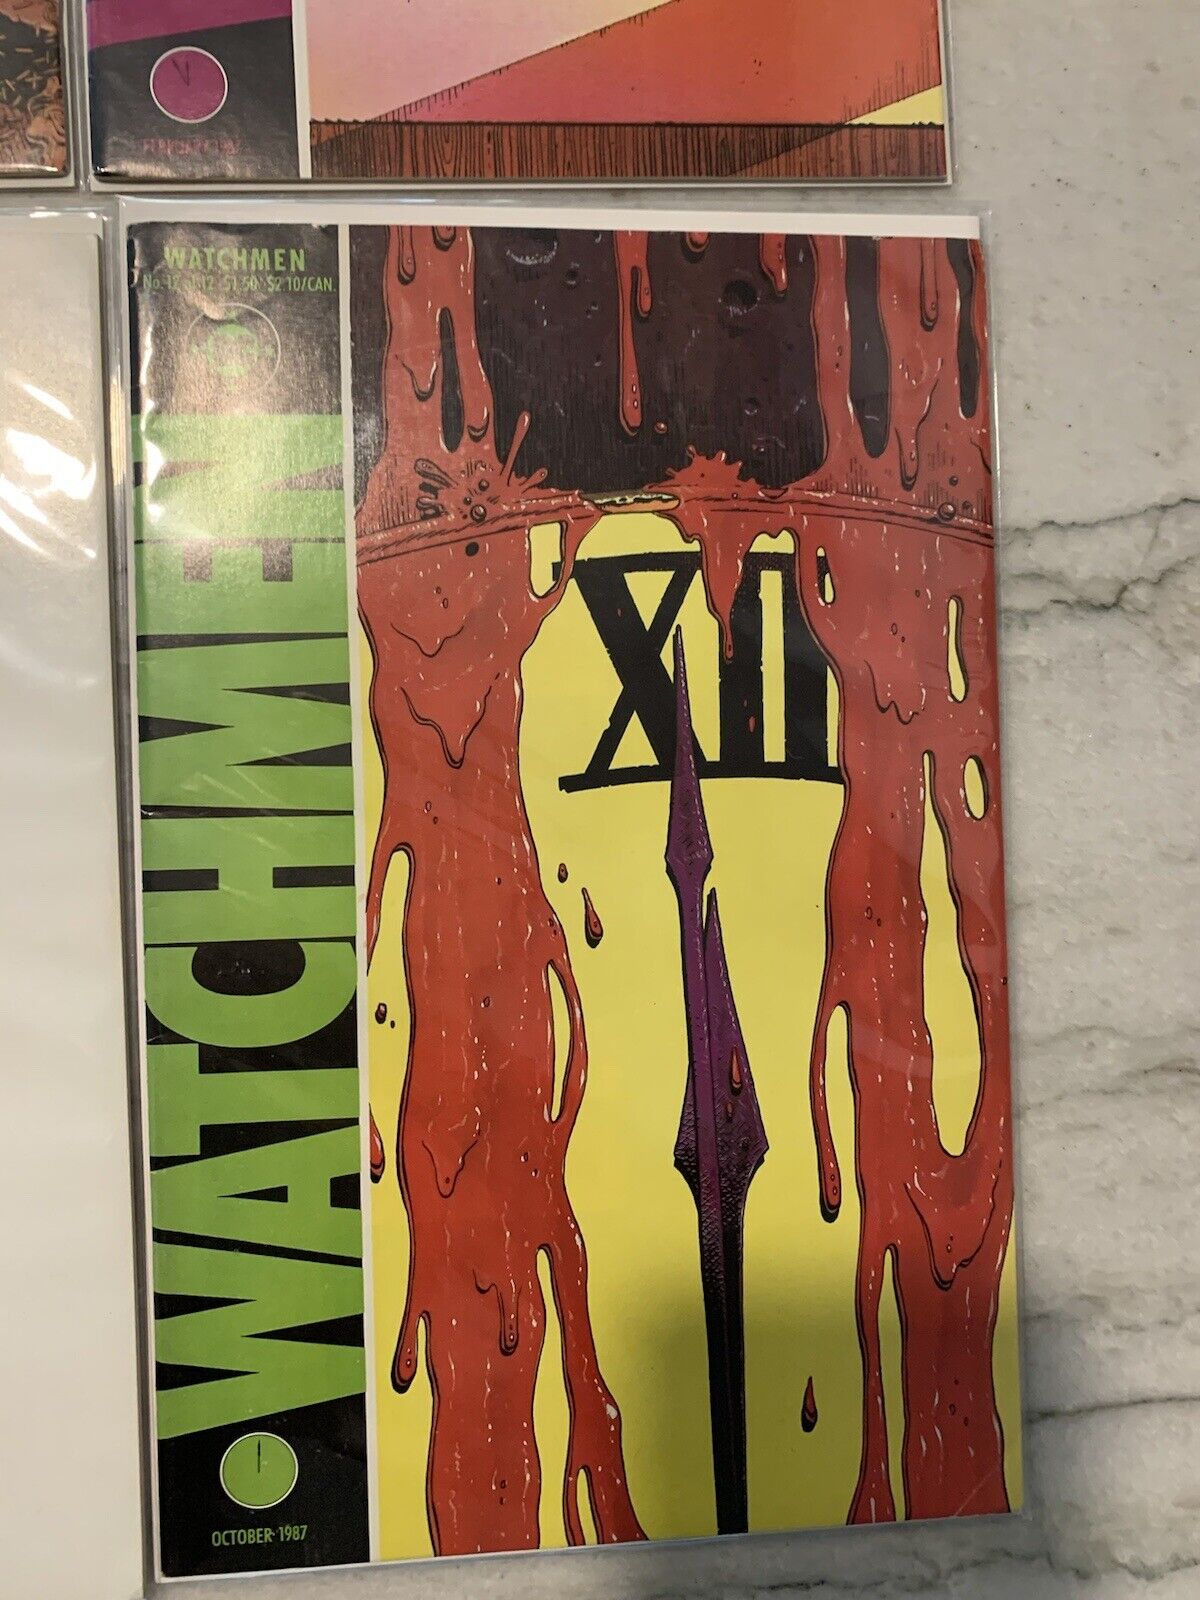 WATCHMEN #s 1 - 12, Complete Limited Series (DC, 1986-1987)